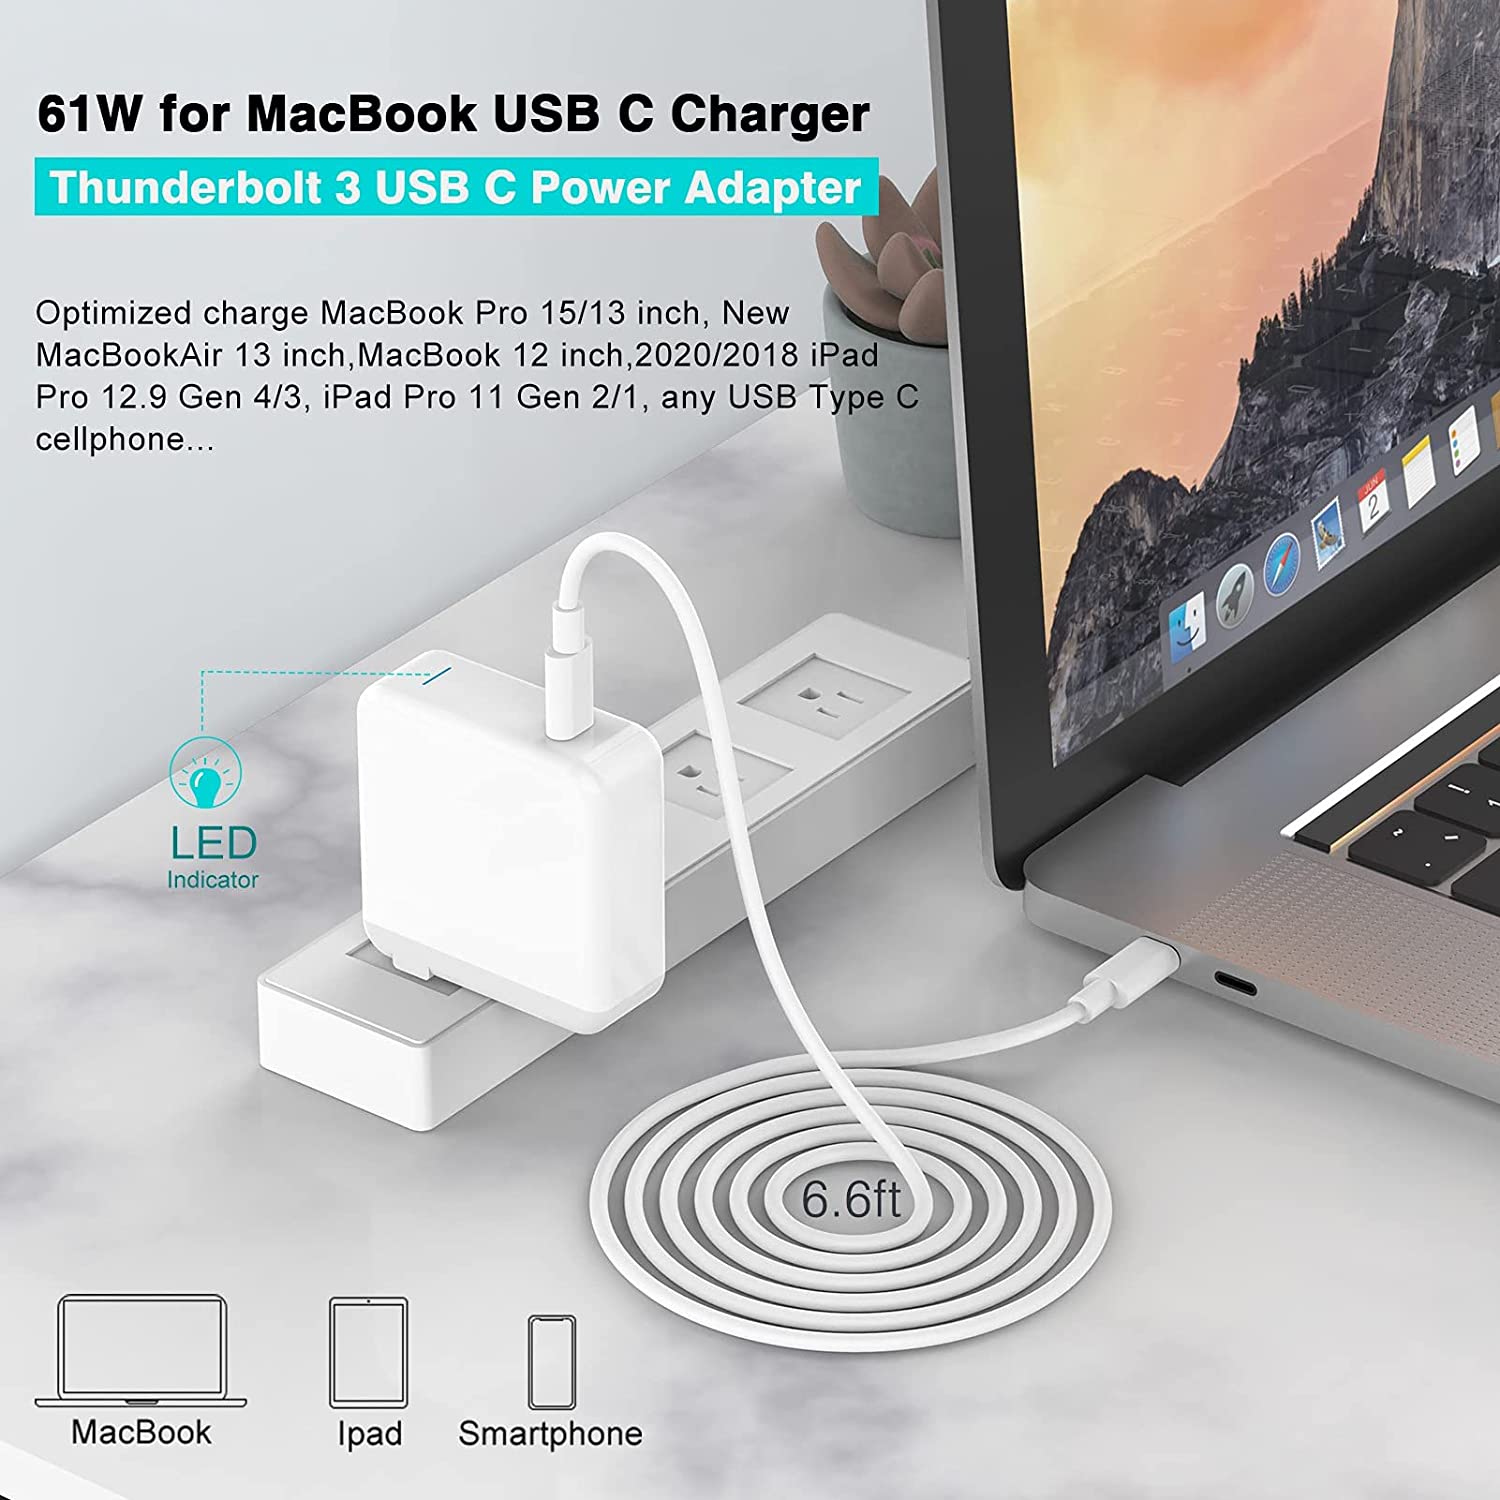 SZpower 61W USB-C Wall Charger for MacBook, iPad, Android, PC (White) - image 2 of 7